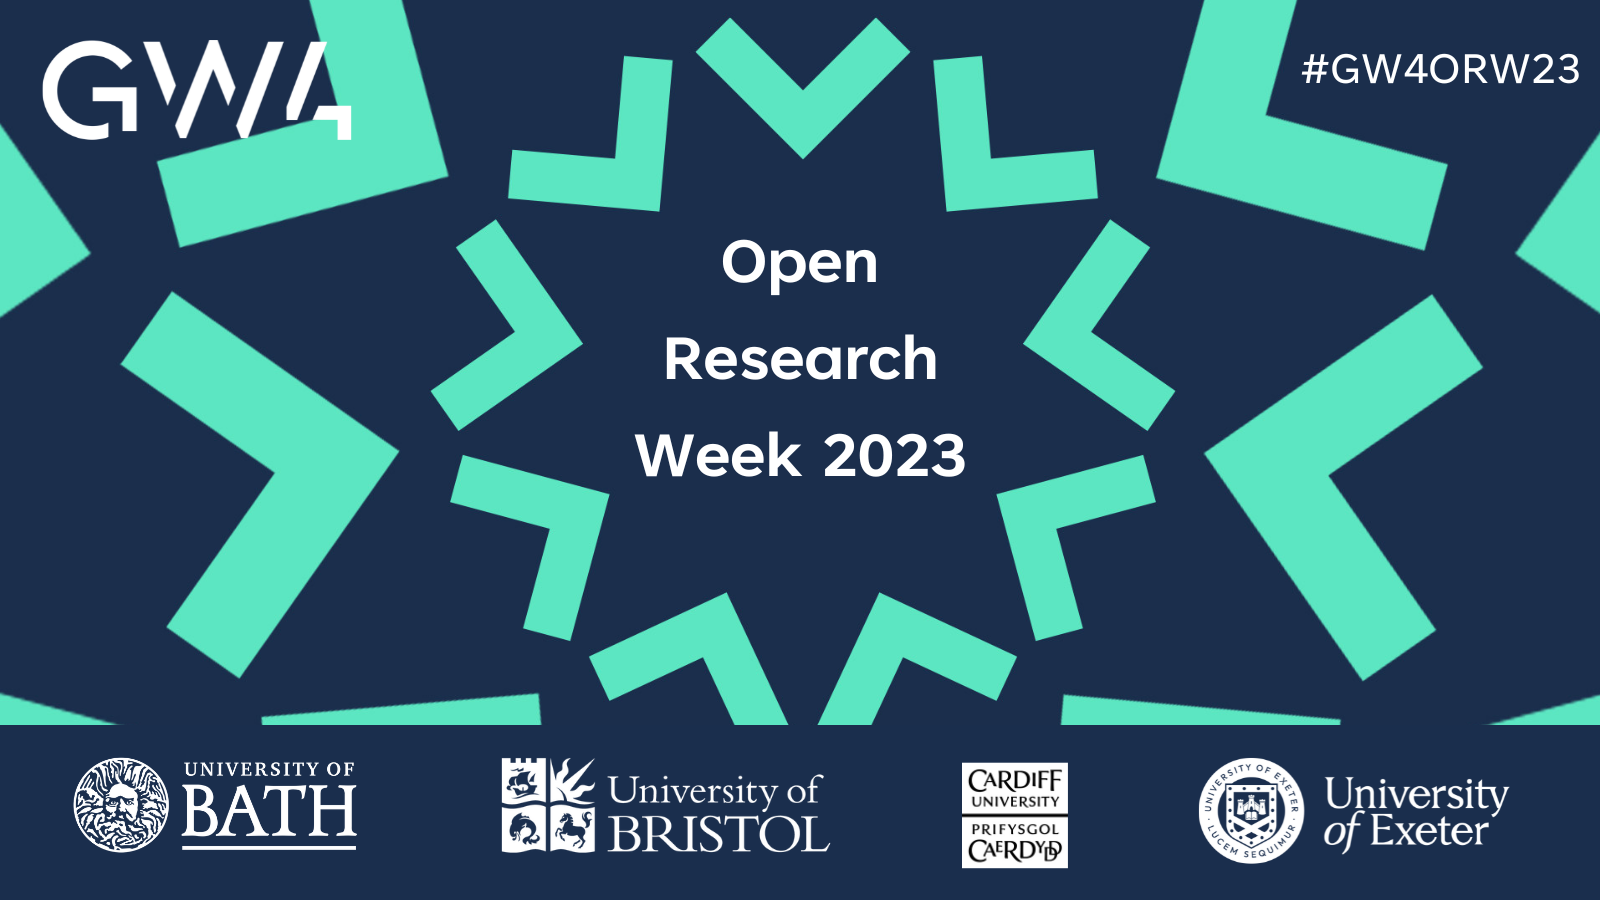 GW4 Alliance launches inaugural GW4 Open Research Week and Prize for 2023